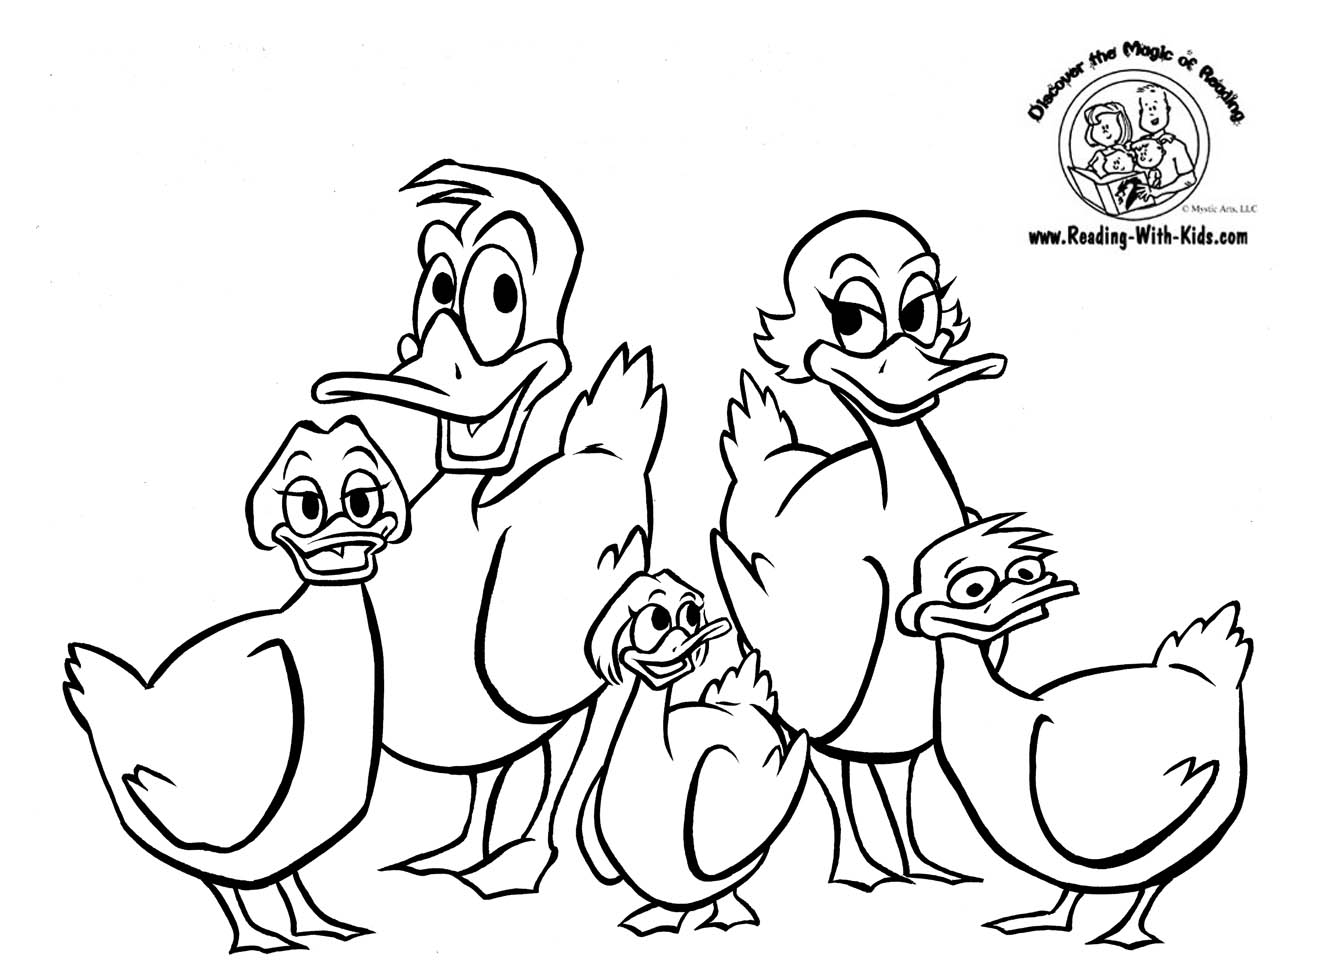 Printable ducks for coloring Mike Folkerth - King of Simple ...